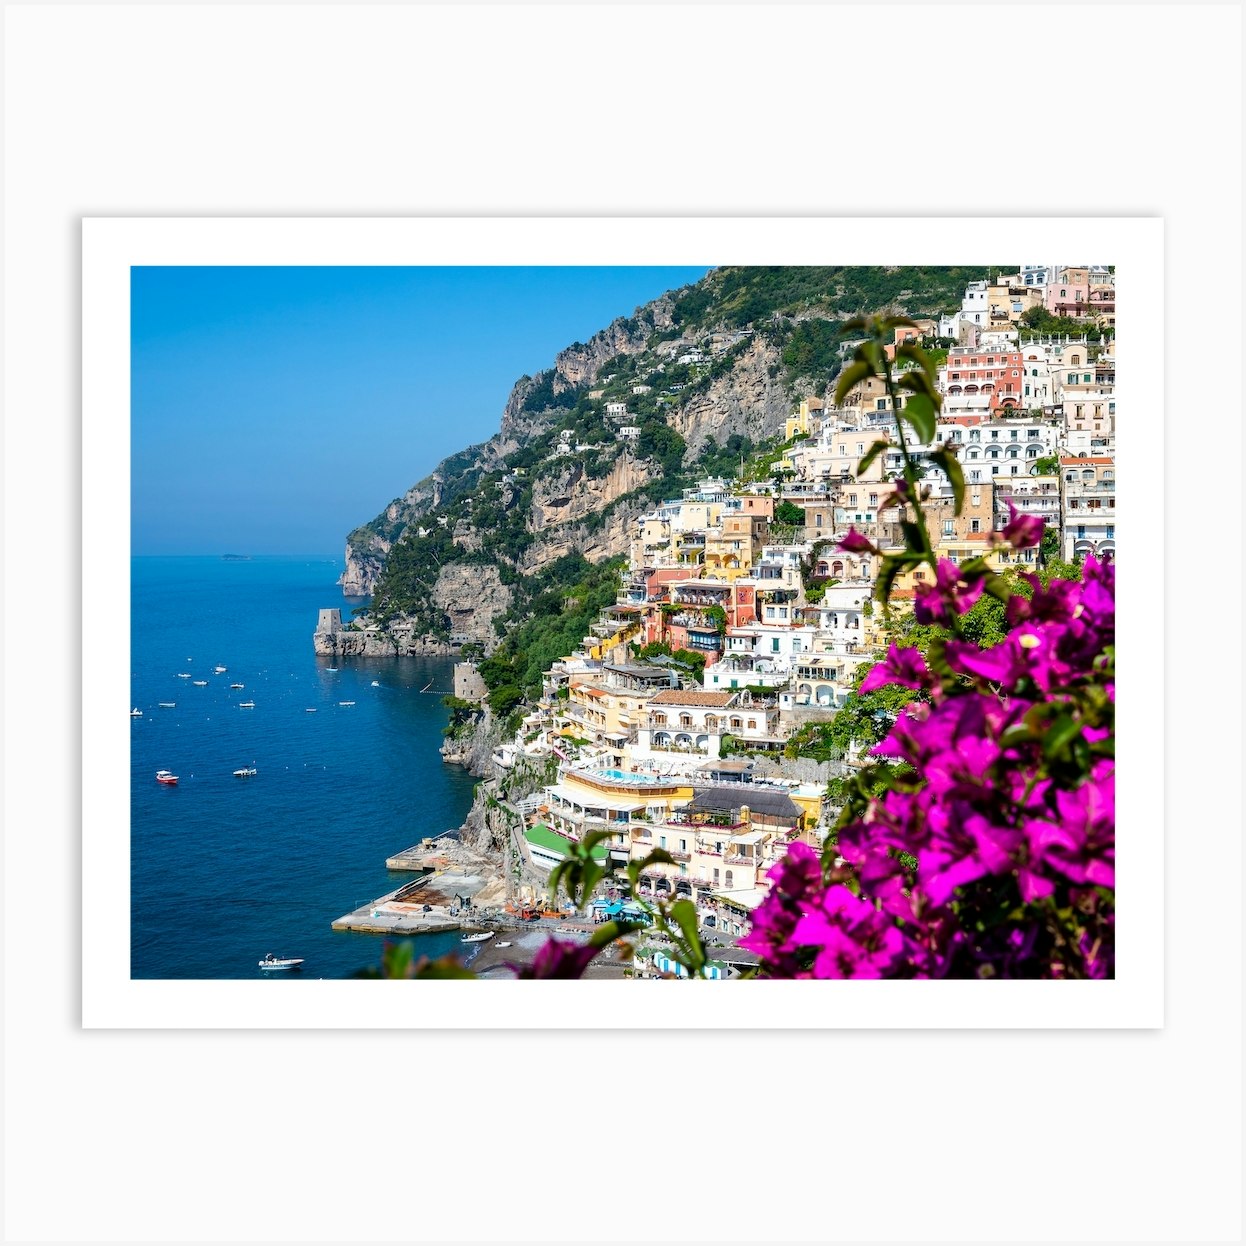 Positano - A Quick Guide to Italy's Vertical City - The Amazing Races